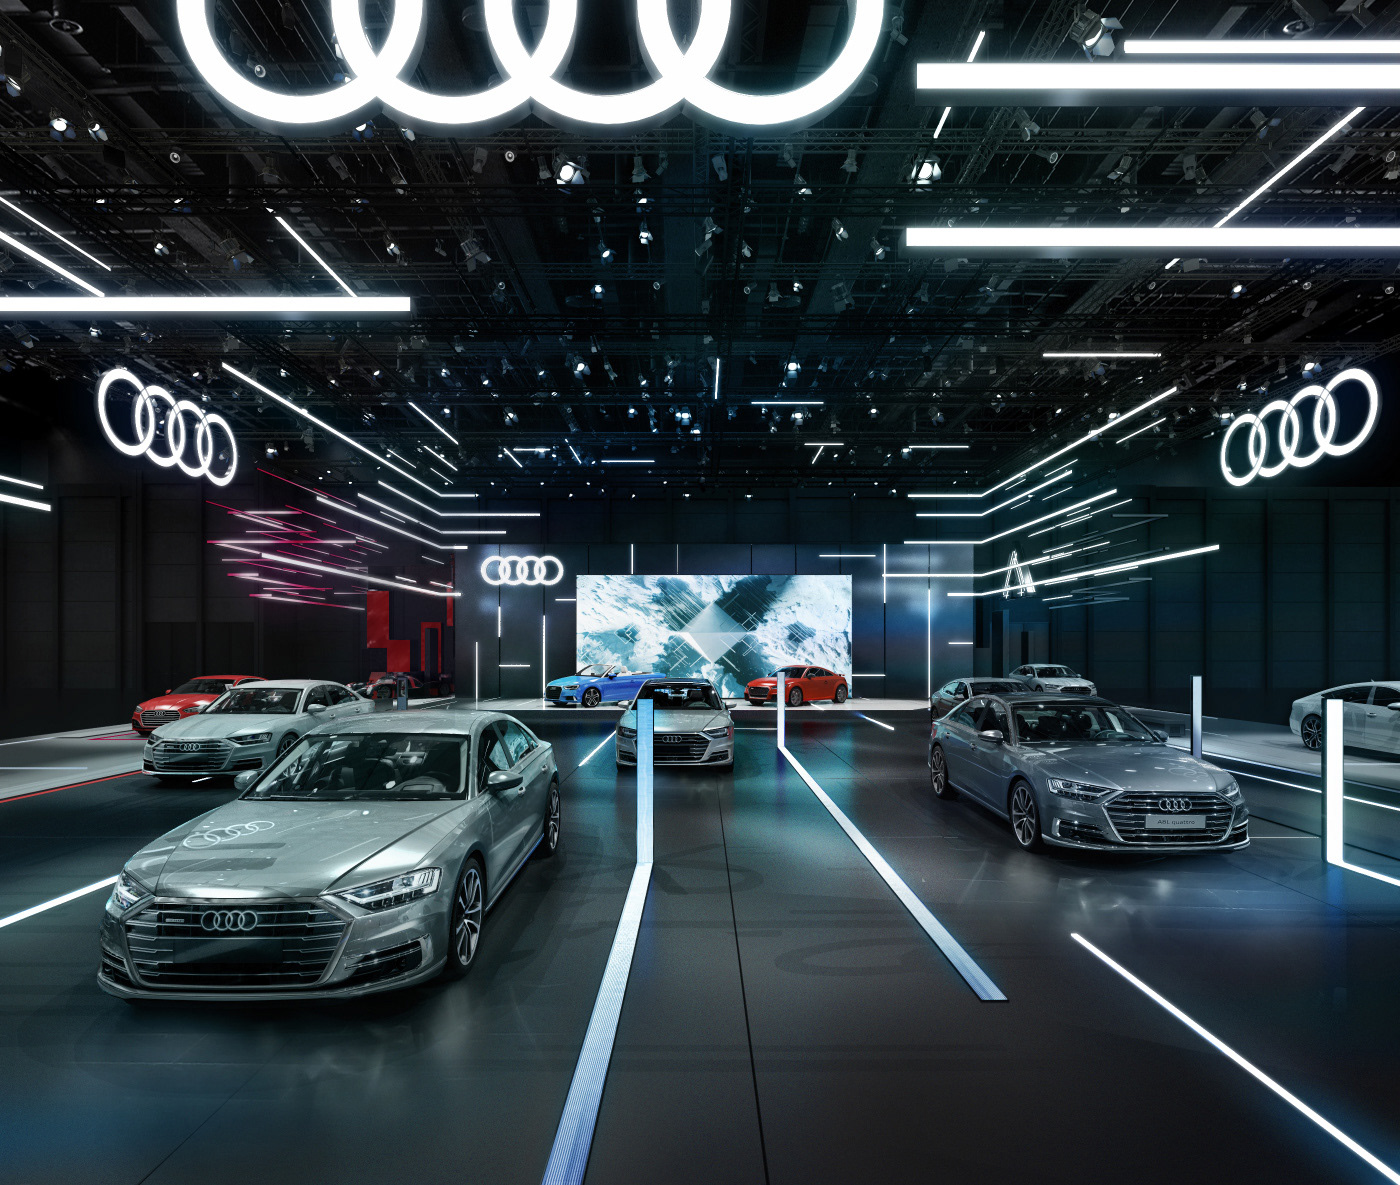 Audi audi booth audi stand audi messestand audi exhibition exhibition stand messestand booth design automotive booth Motor show